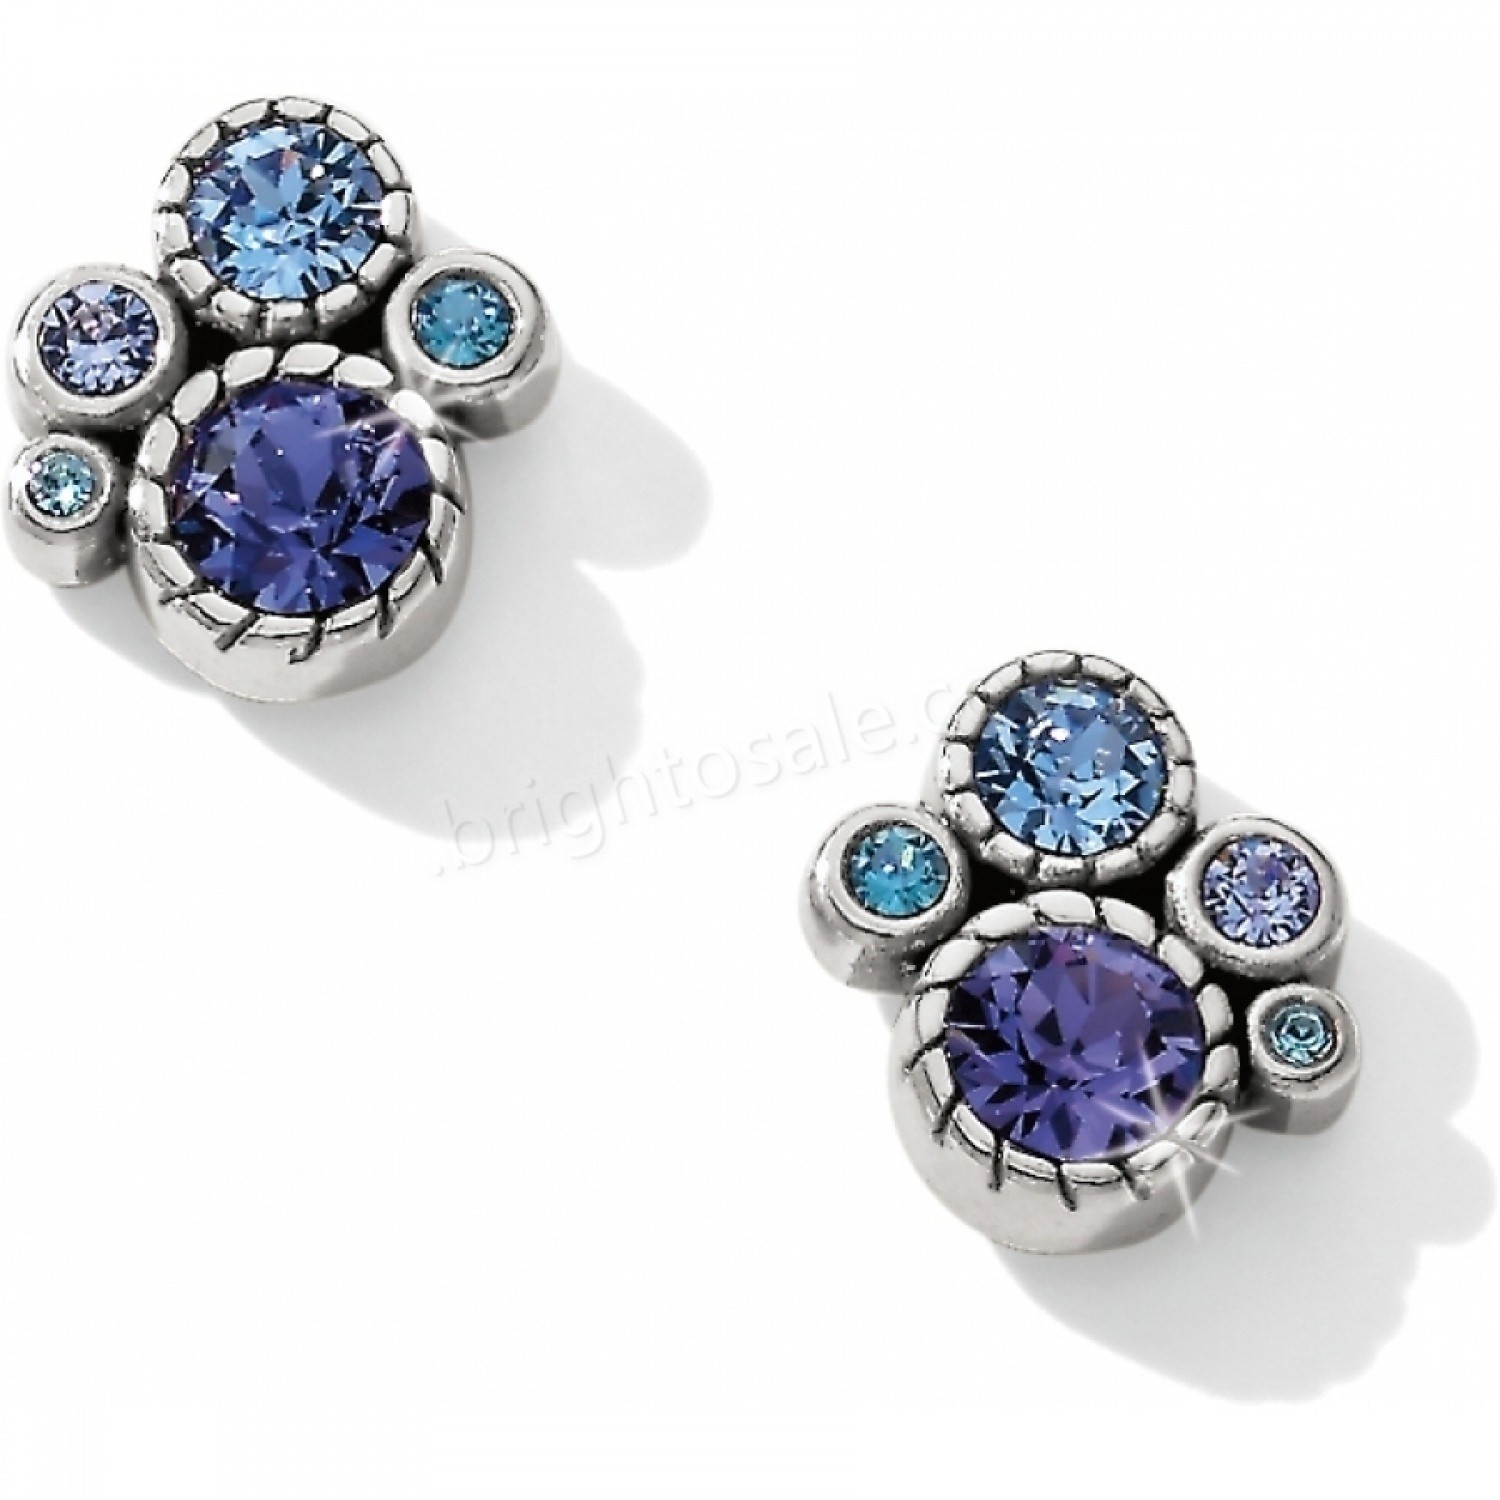 Brighton Collectibles & Online Discount Halo Post Earrings - Brighton Collectibles & Online Discount Halo Post Earrings